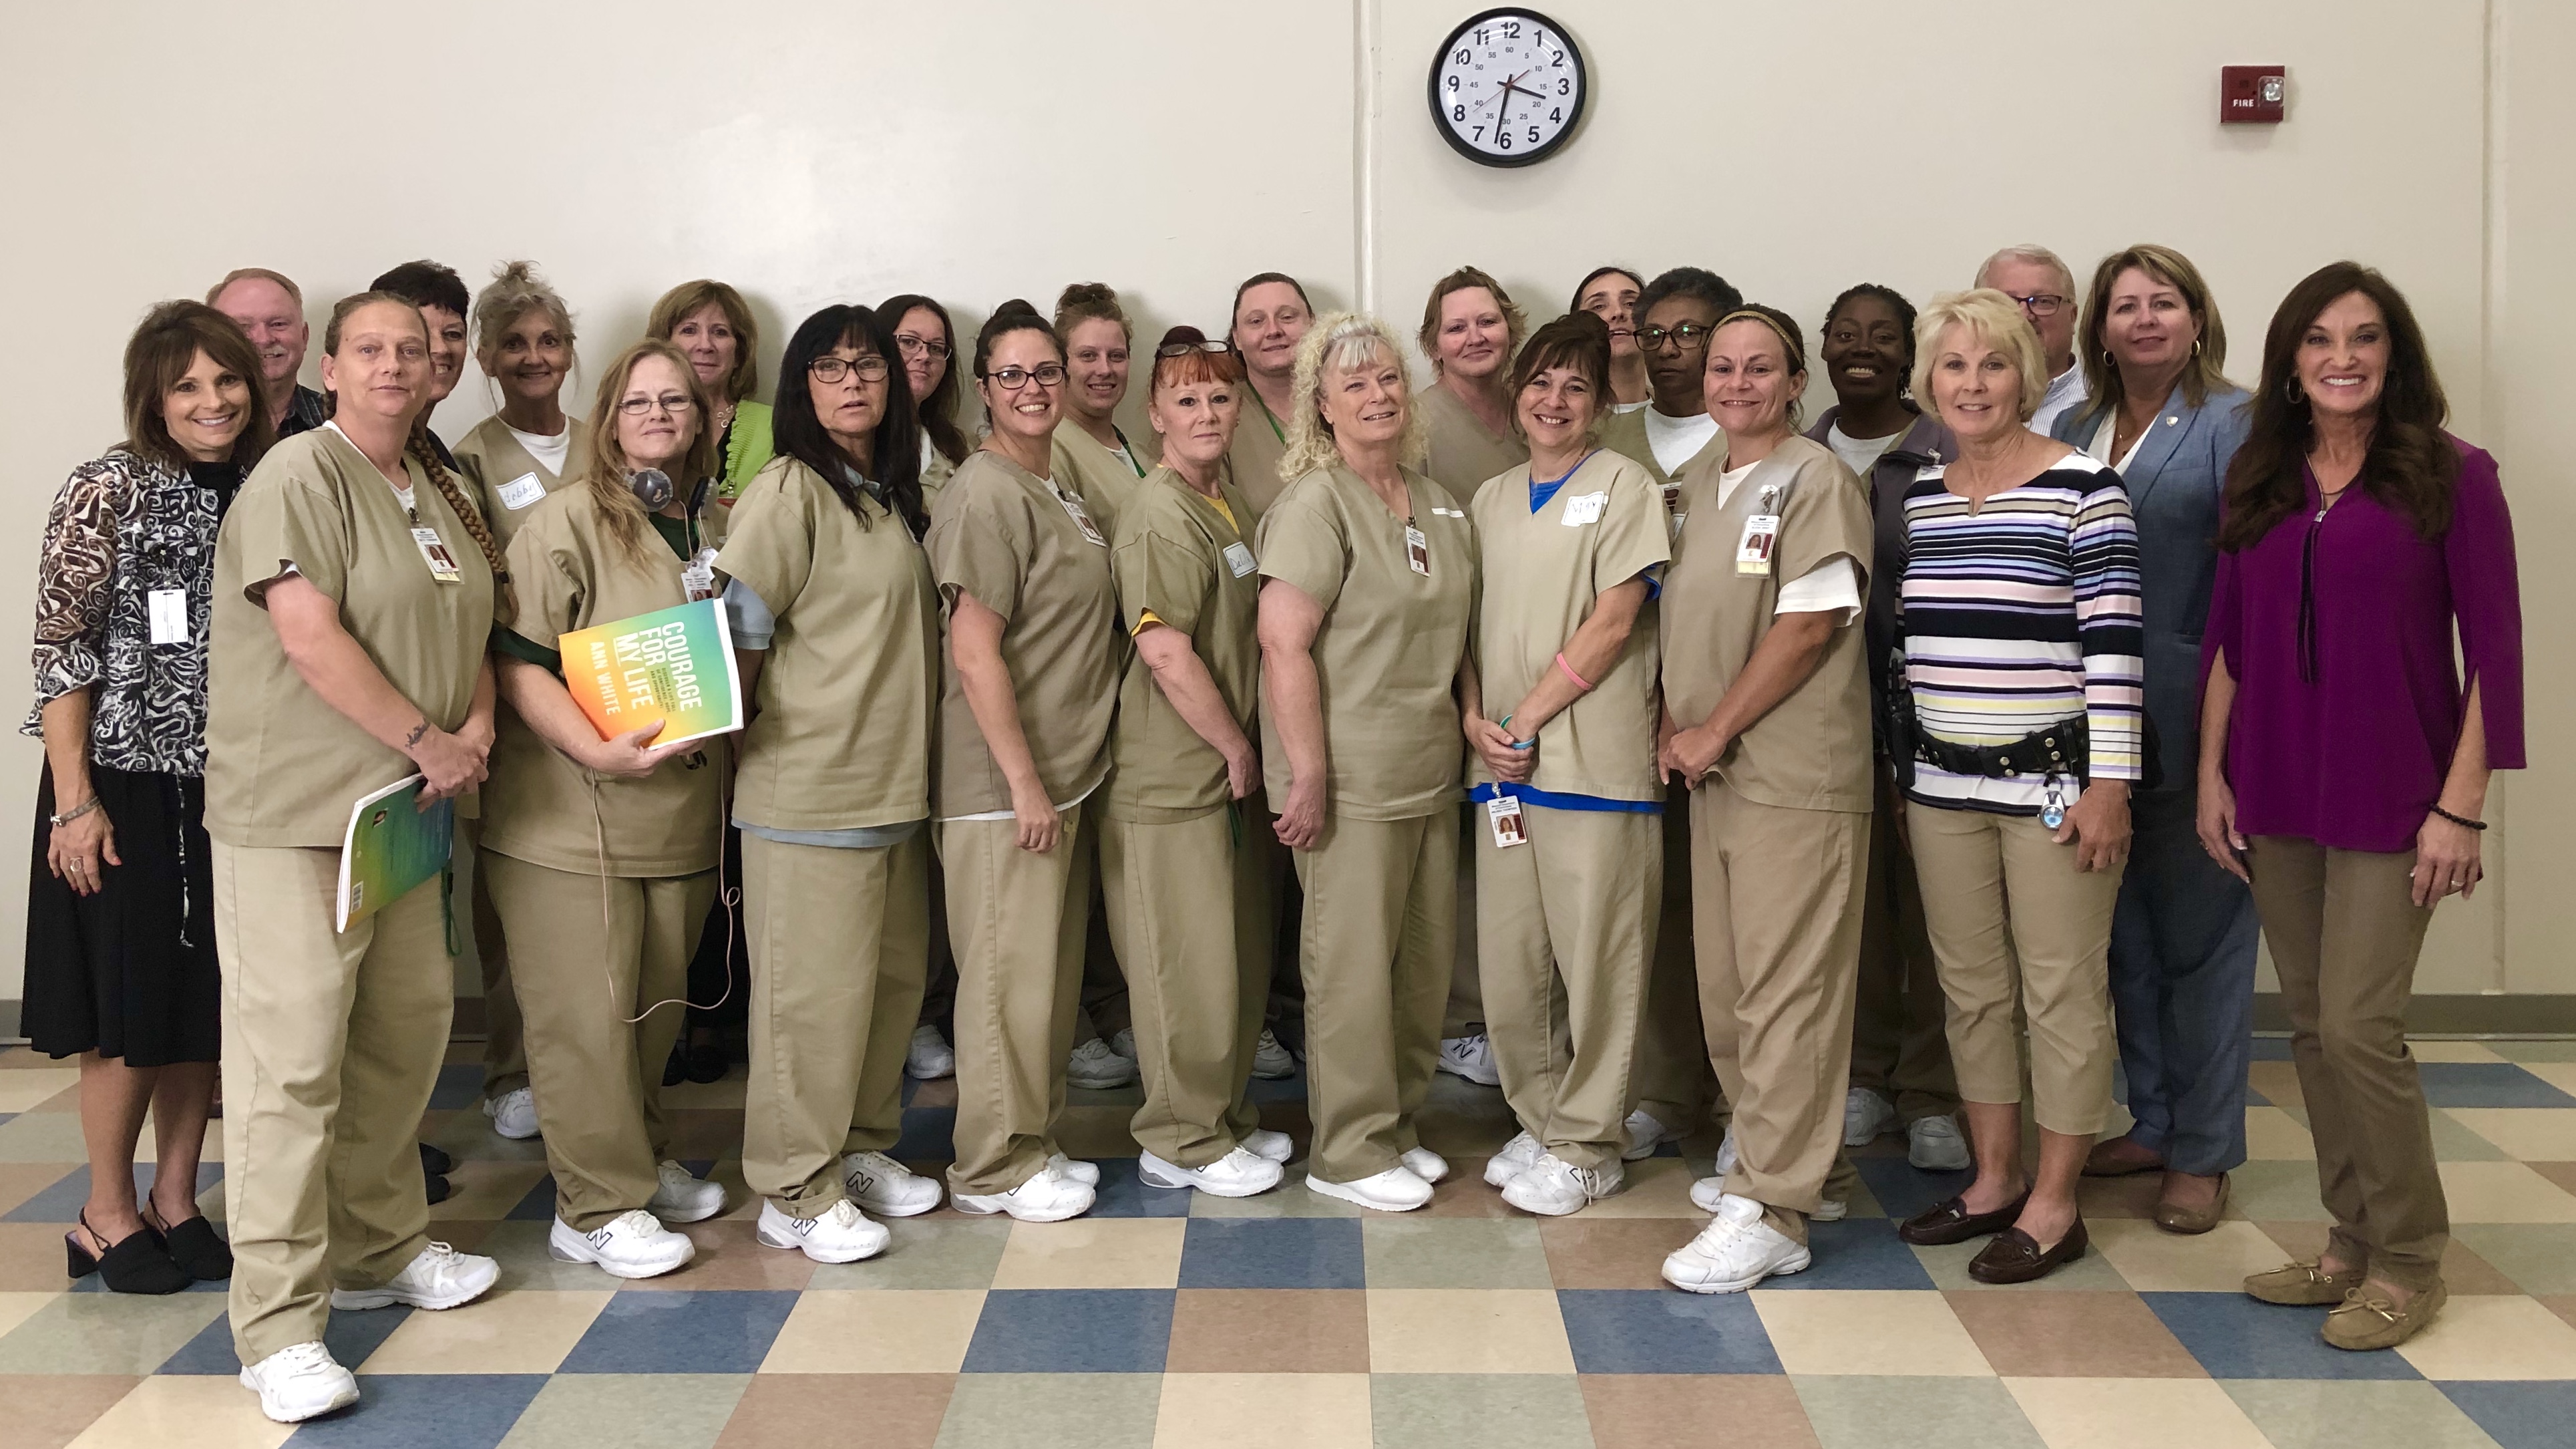 Motivational speaker Ann White with a group  of women and staff at Chillicothe Correctional Center